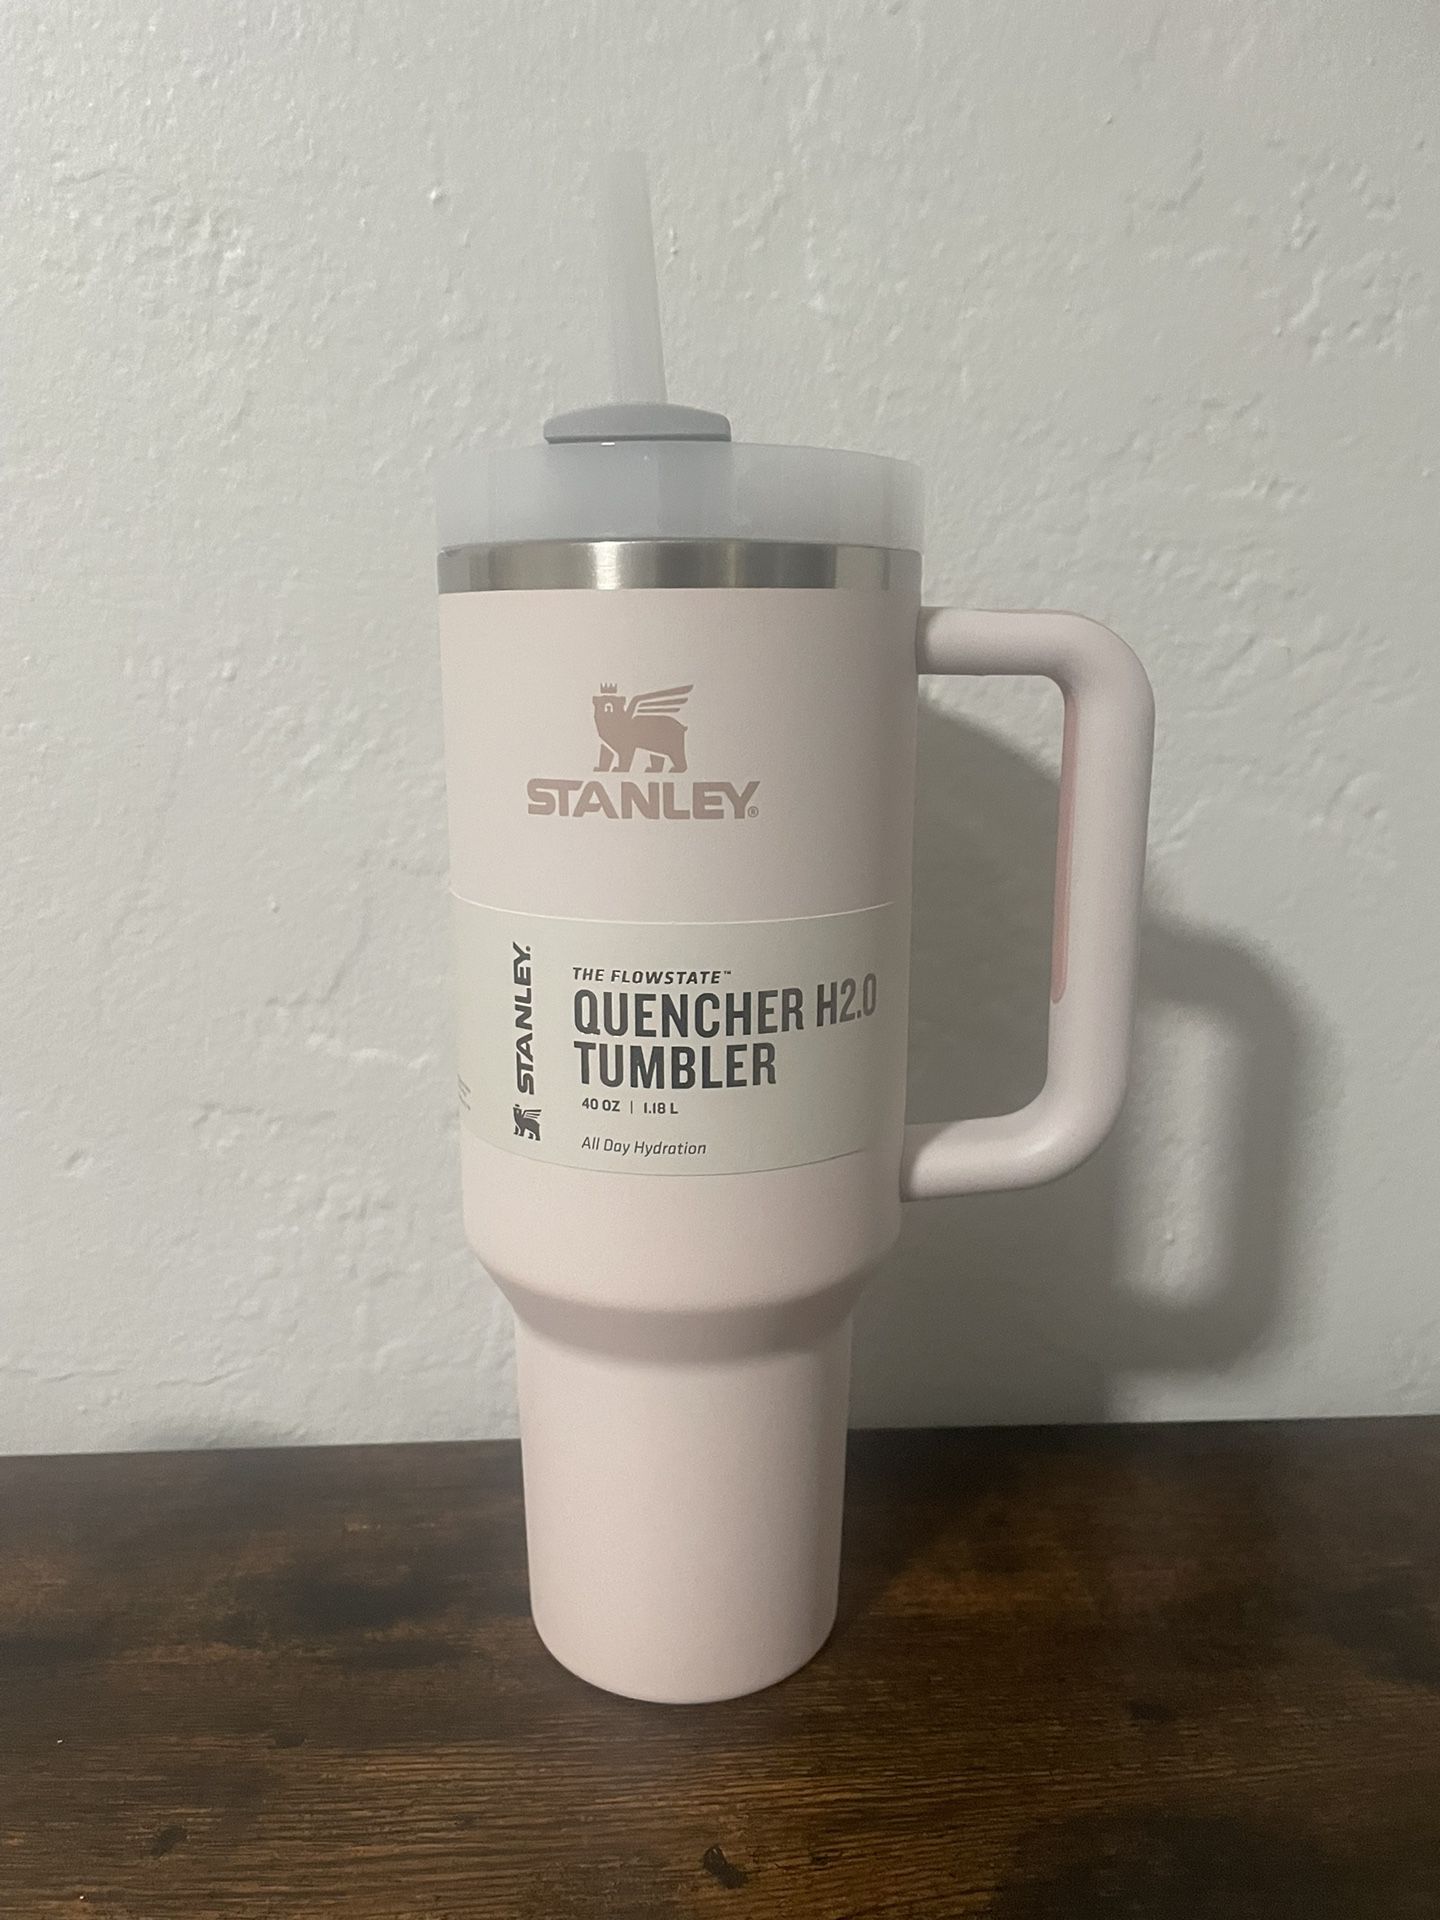 Stanley 30 oz. Quencher H2.0 FlowState Tumbler - Rose Quartz Glow - “Rose  Gold” for Sale in City Of Industry, CA - OfferUp